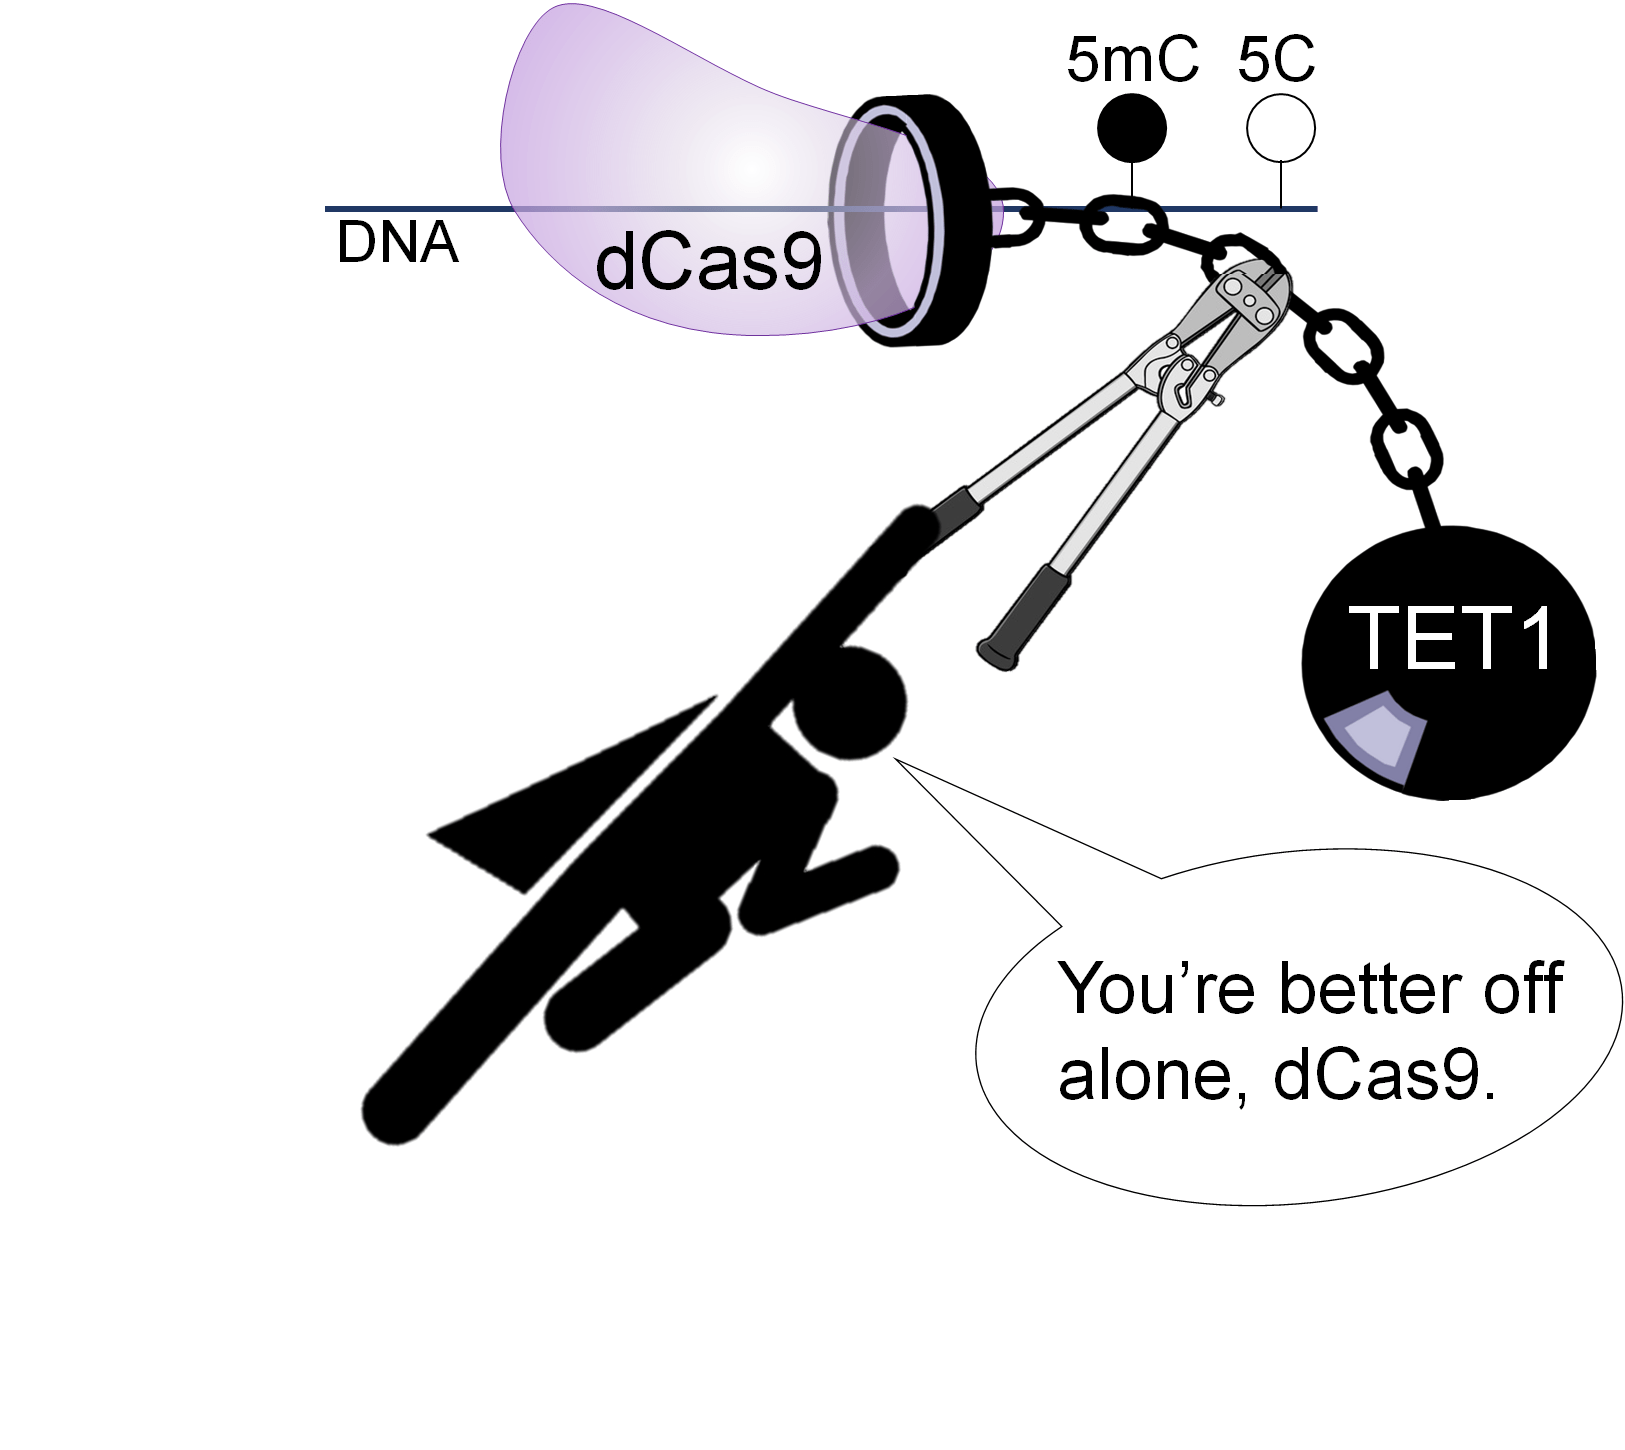 Cartoon depiction of a superhero cutting a chain tethering TET1 to dCas9